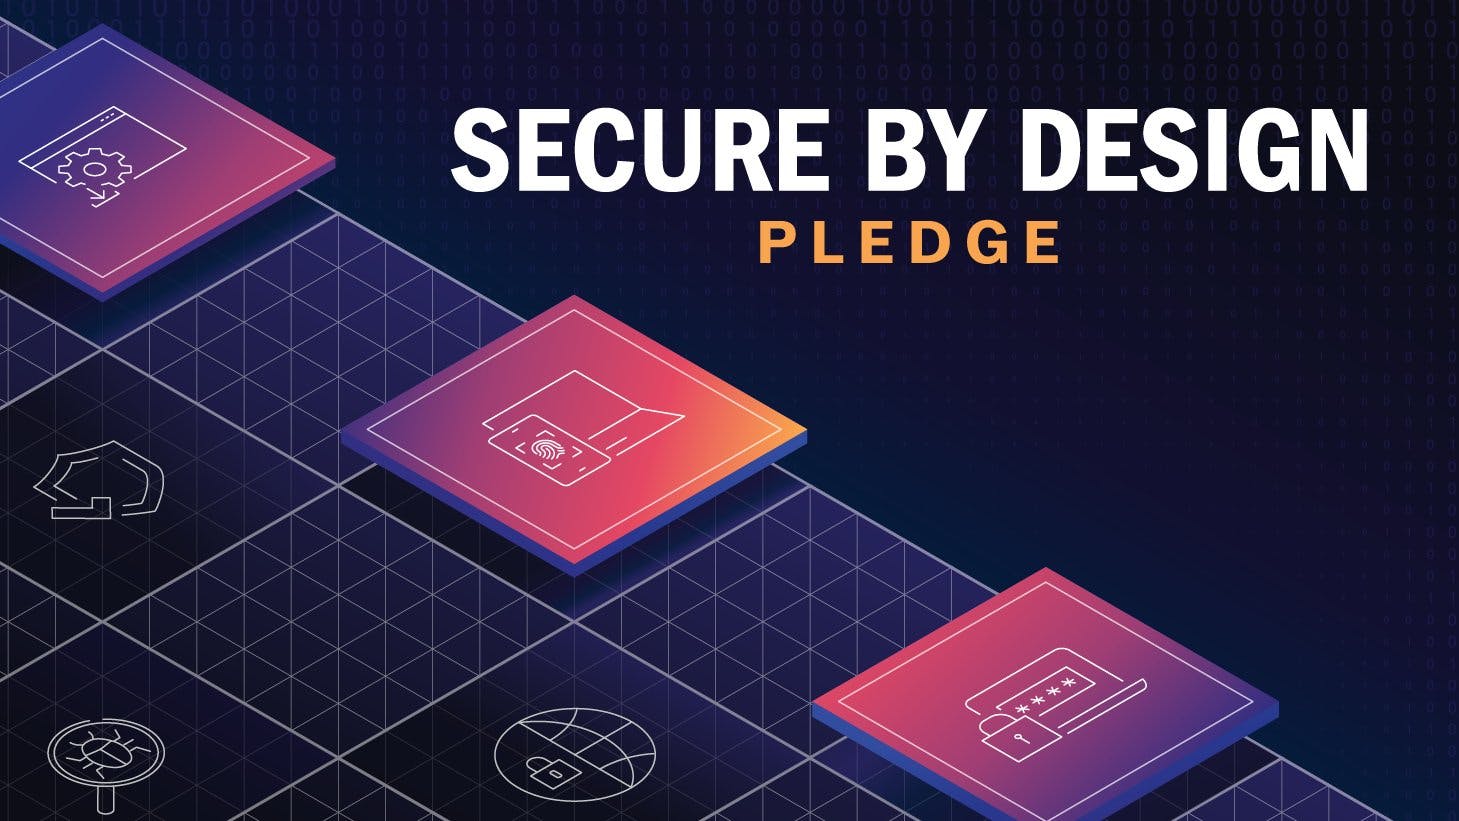 Google, GitHub Join CISA's Secure by Design Pledge for Enhanced Product Security in Collaboration with Public Sector